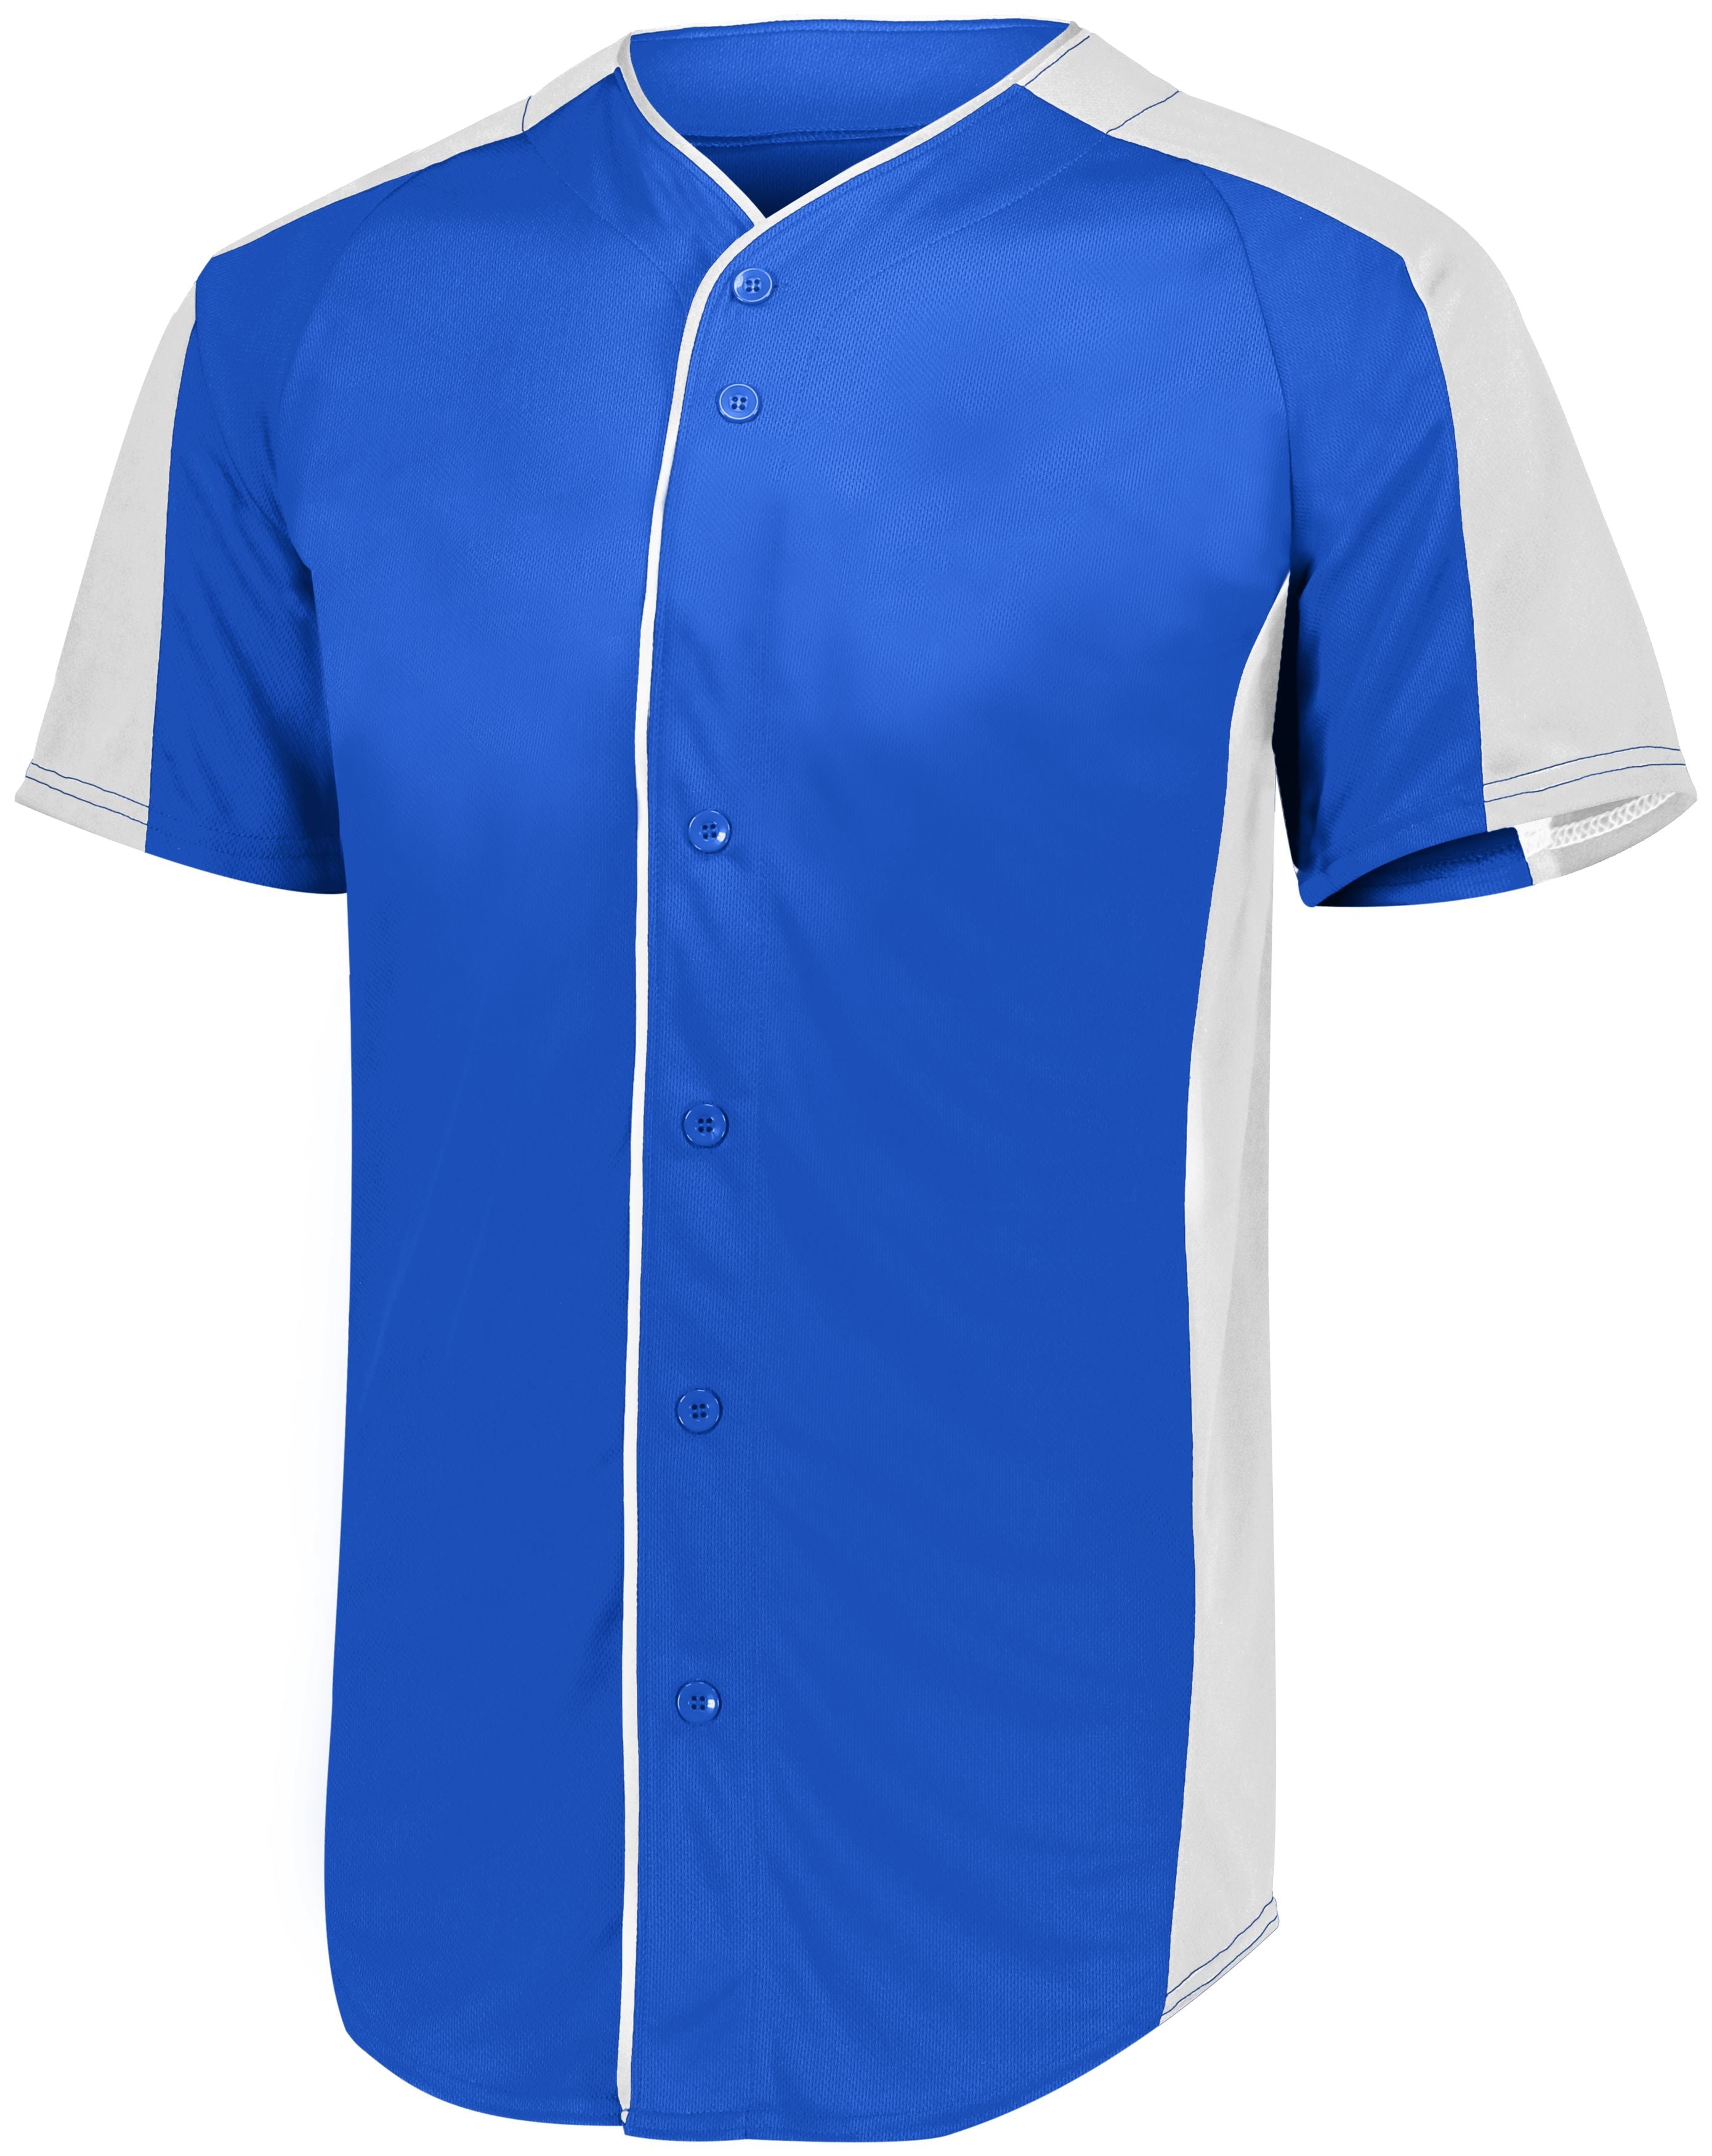 Augusta Sportswear Youth Full-Button Baseball Jersey in Royal/White  -Part of the Youth, Youth-Jersey, Augusta-Products, Baseball, Shirts, All-Sports, All-Sports-1 product lines at KanaleyCreations.com